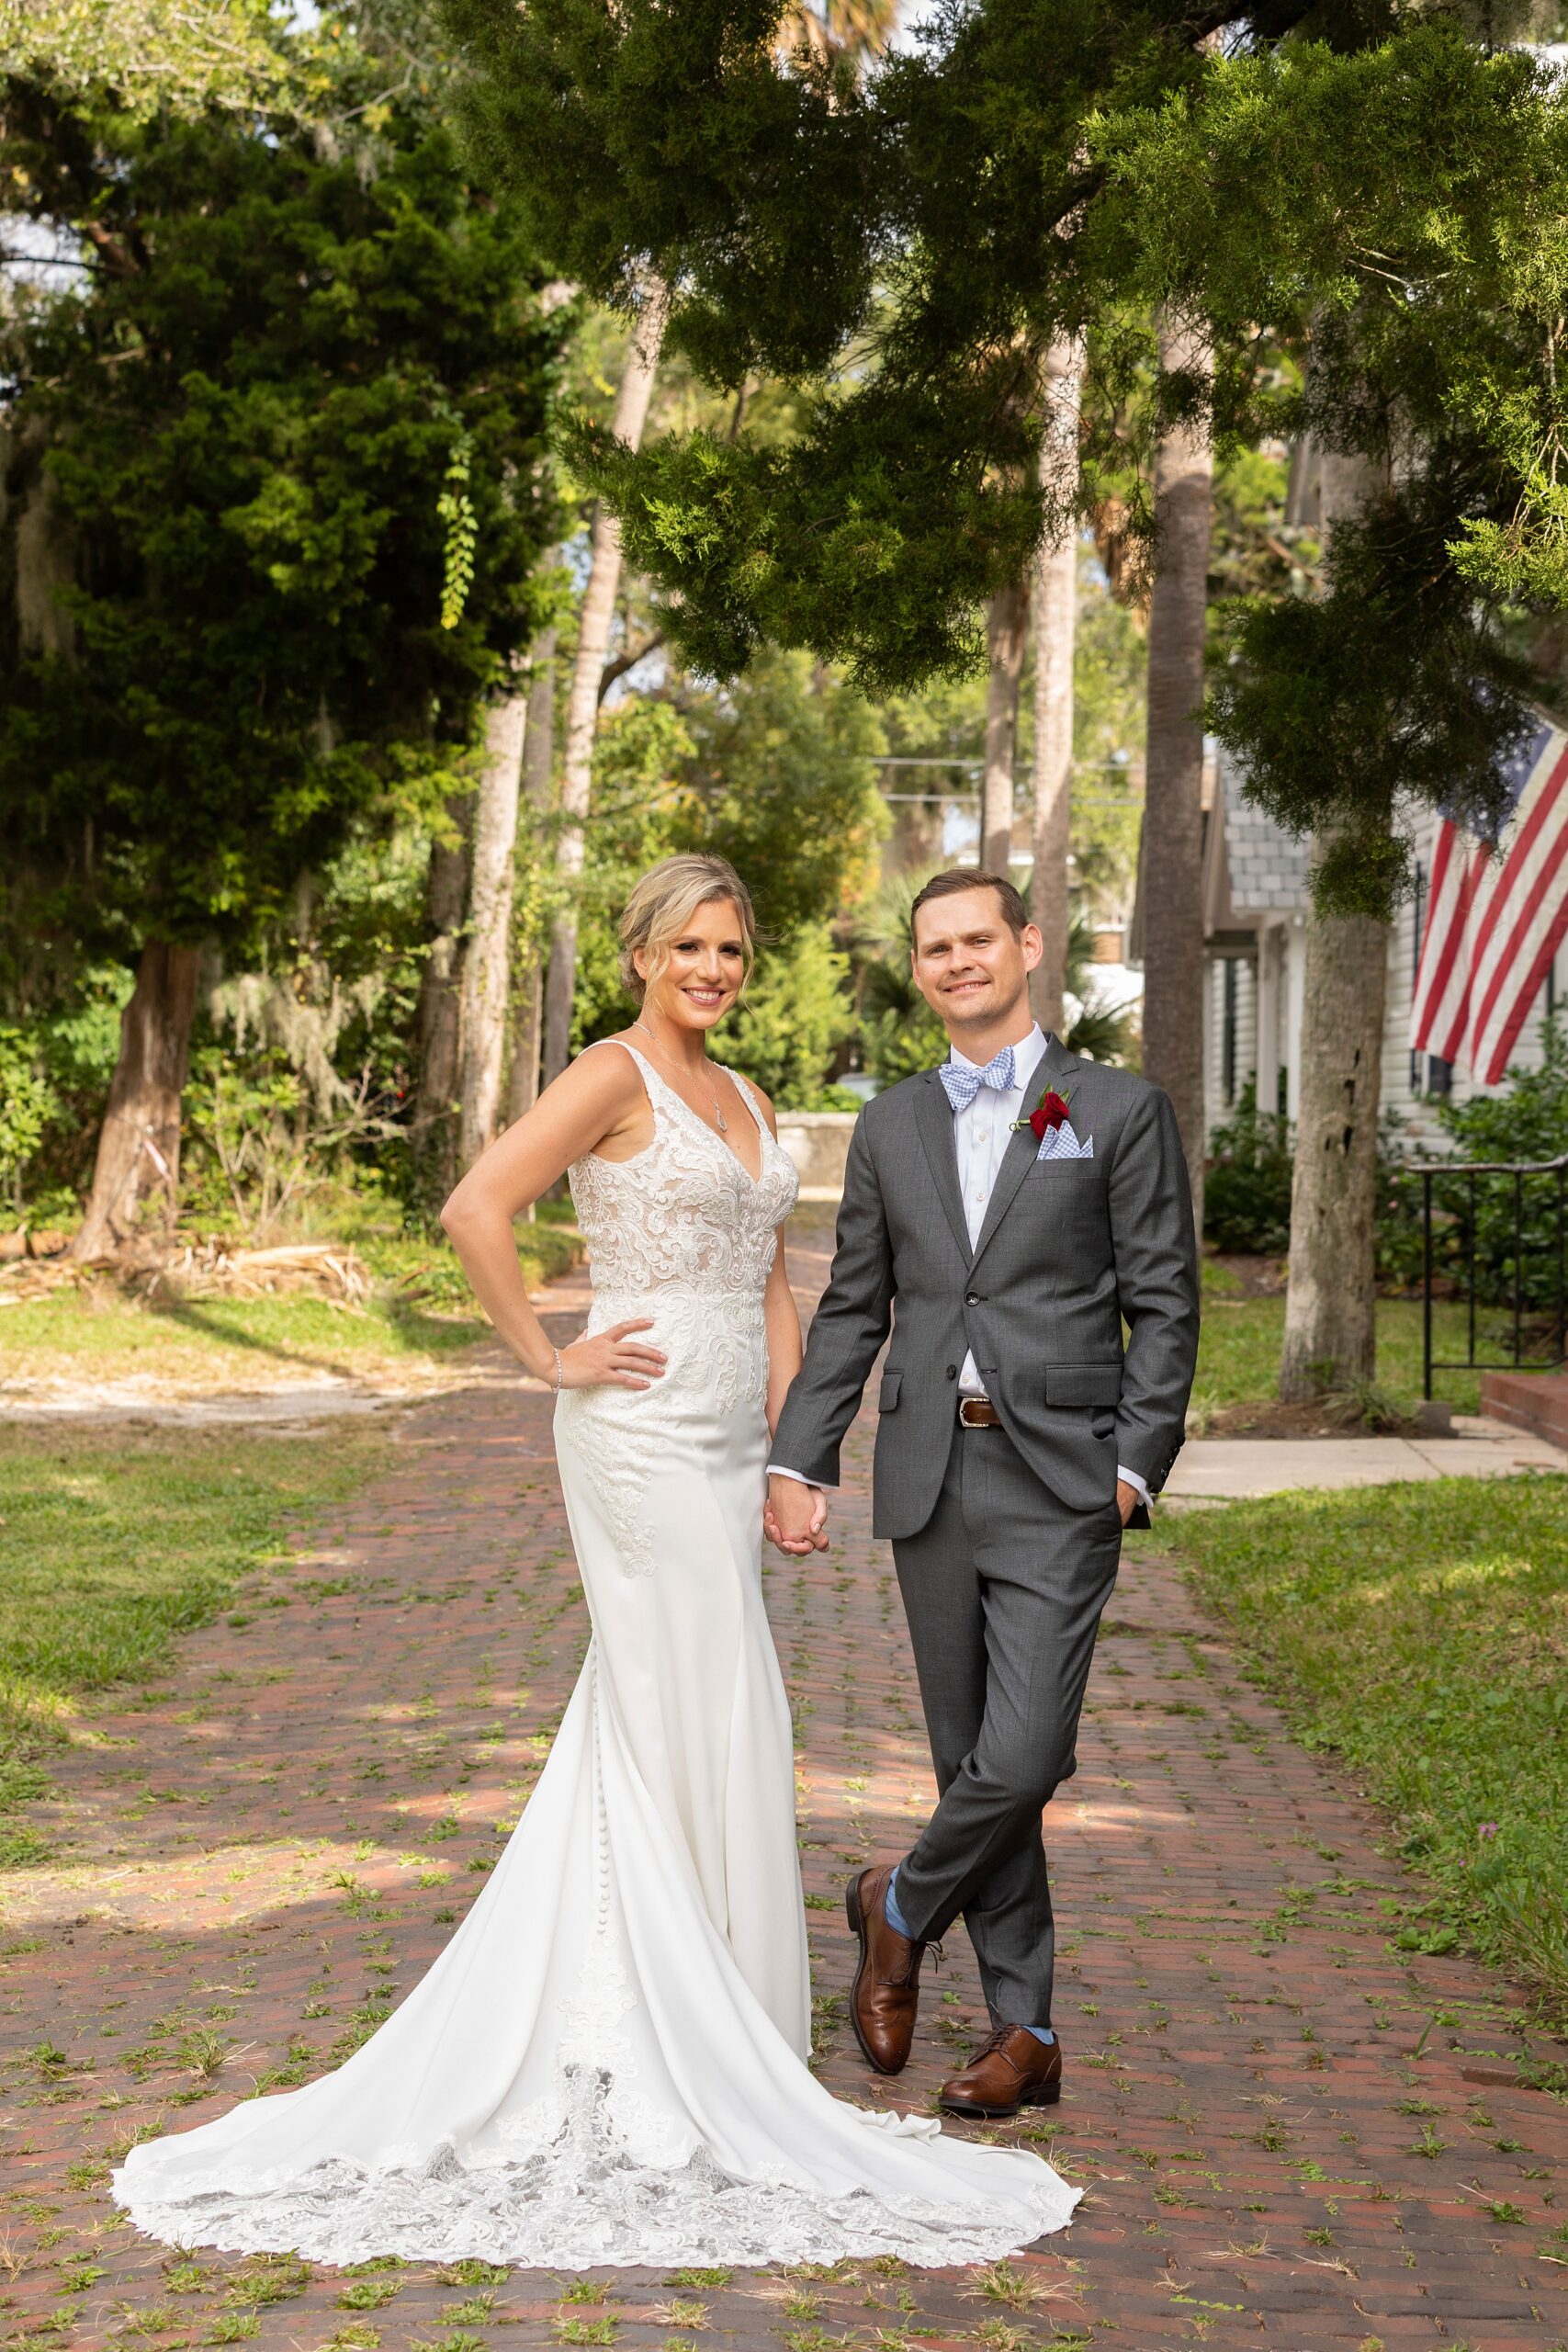 Newlyweds stand in a brick sidewalk holding hands at their river house events wedding